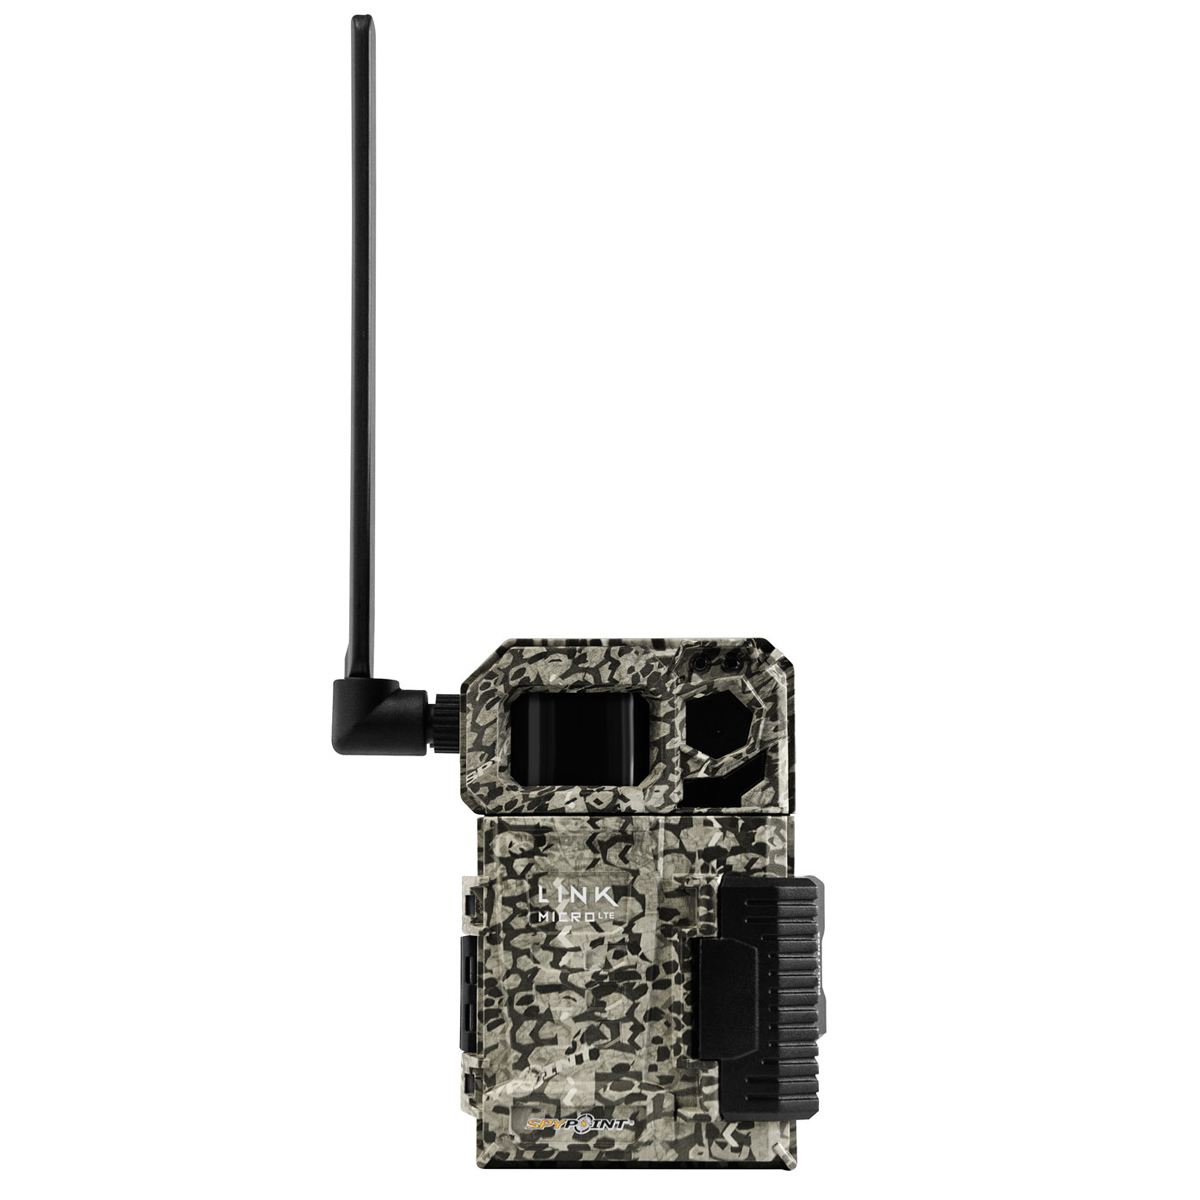 SPYPOINT LINK MICRO LTE 10MP WIRELESS TRAIL CAMERA Photo